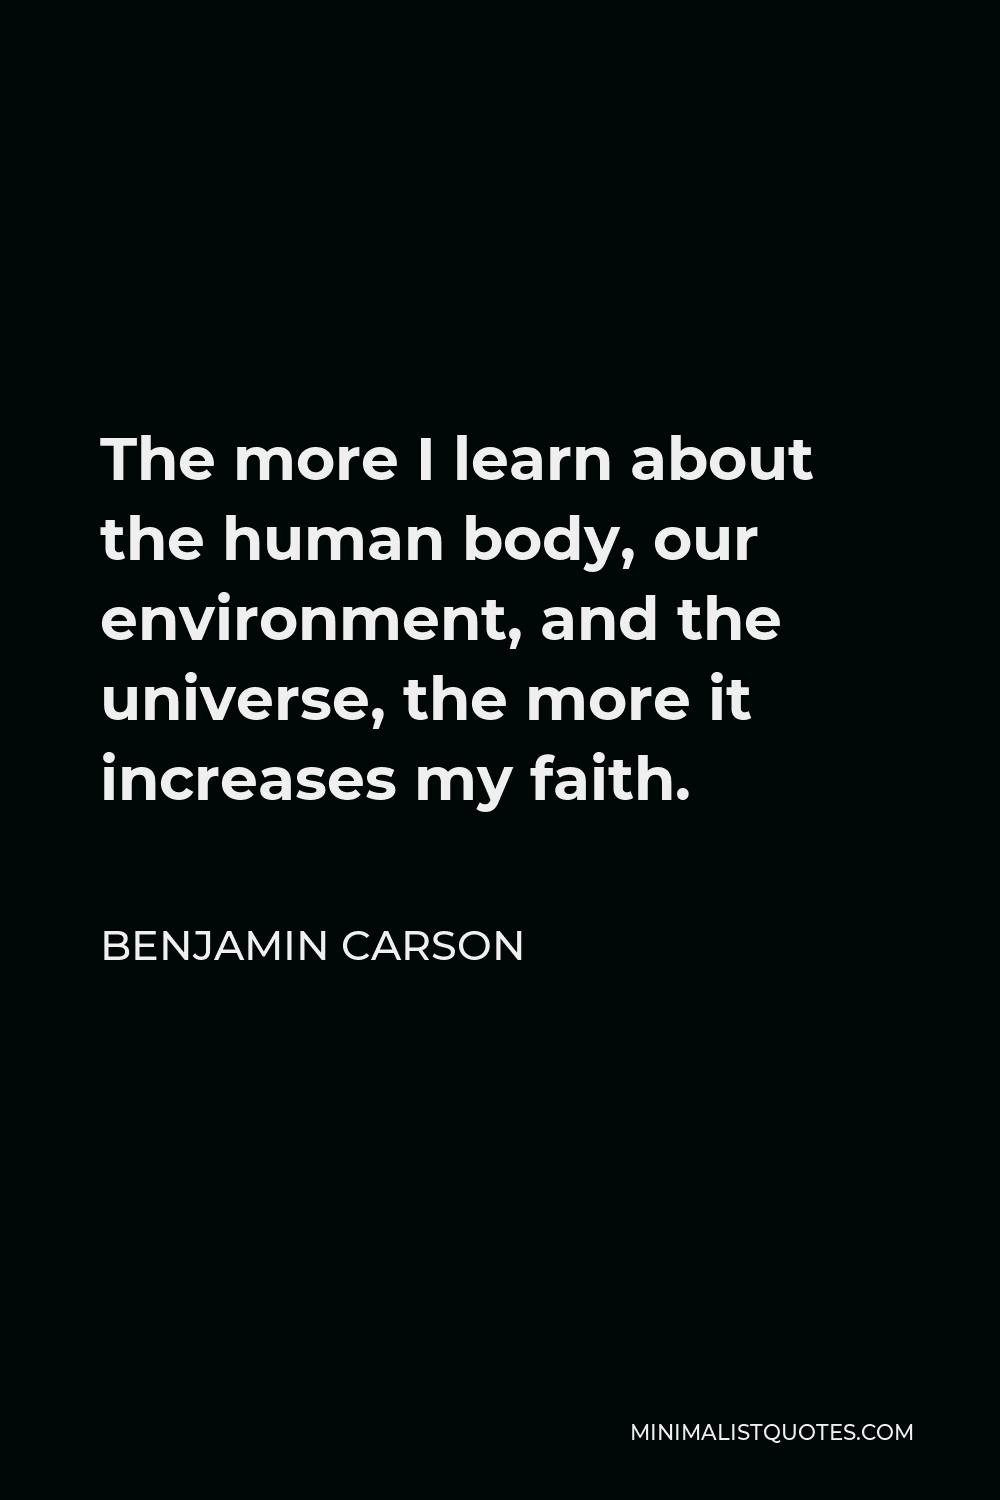 Benjamin Carson Quote - The more I learn about the human body, our environment, and the universe, the more it increases my faith.